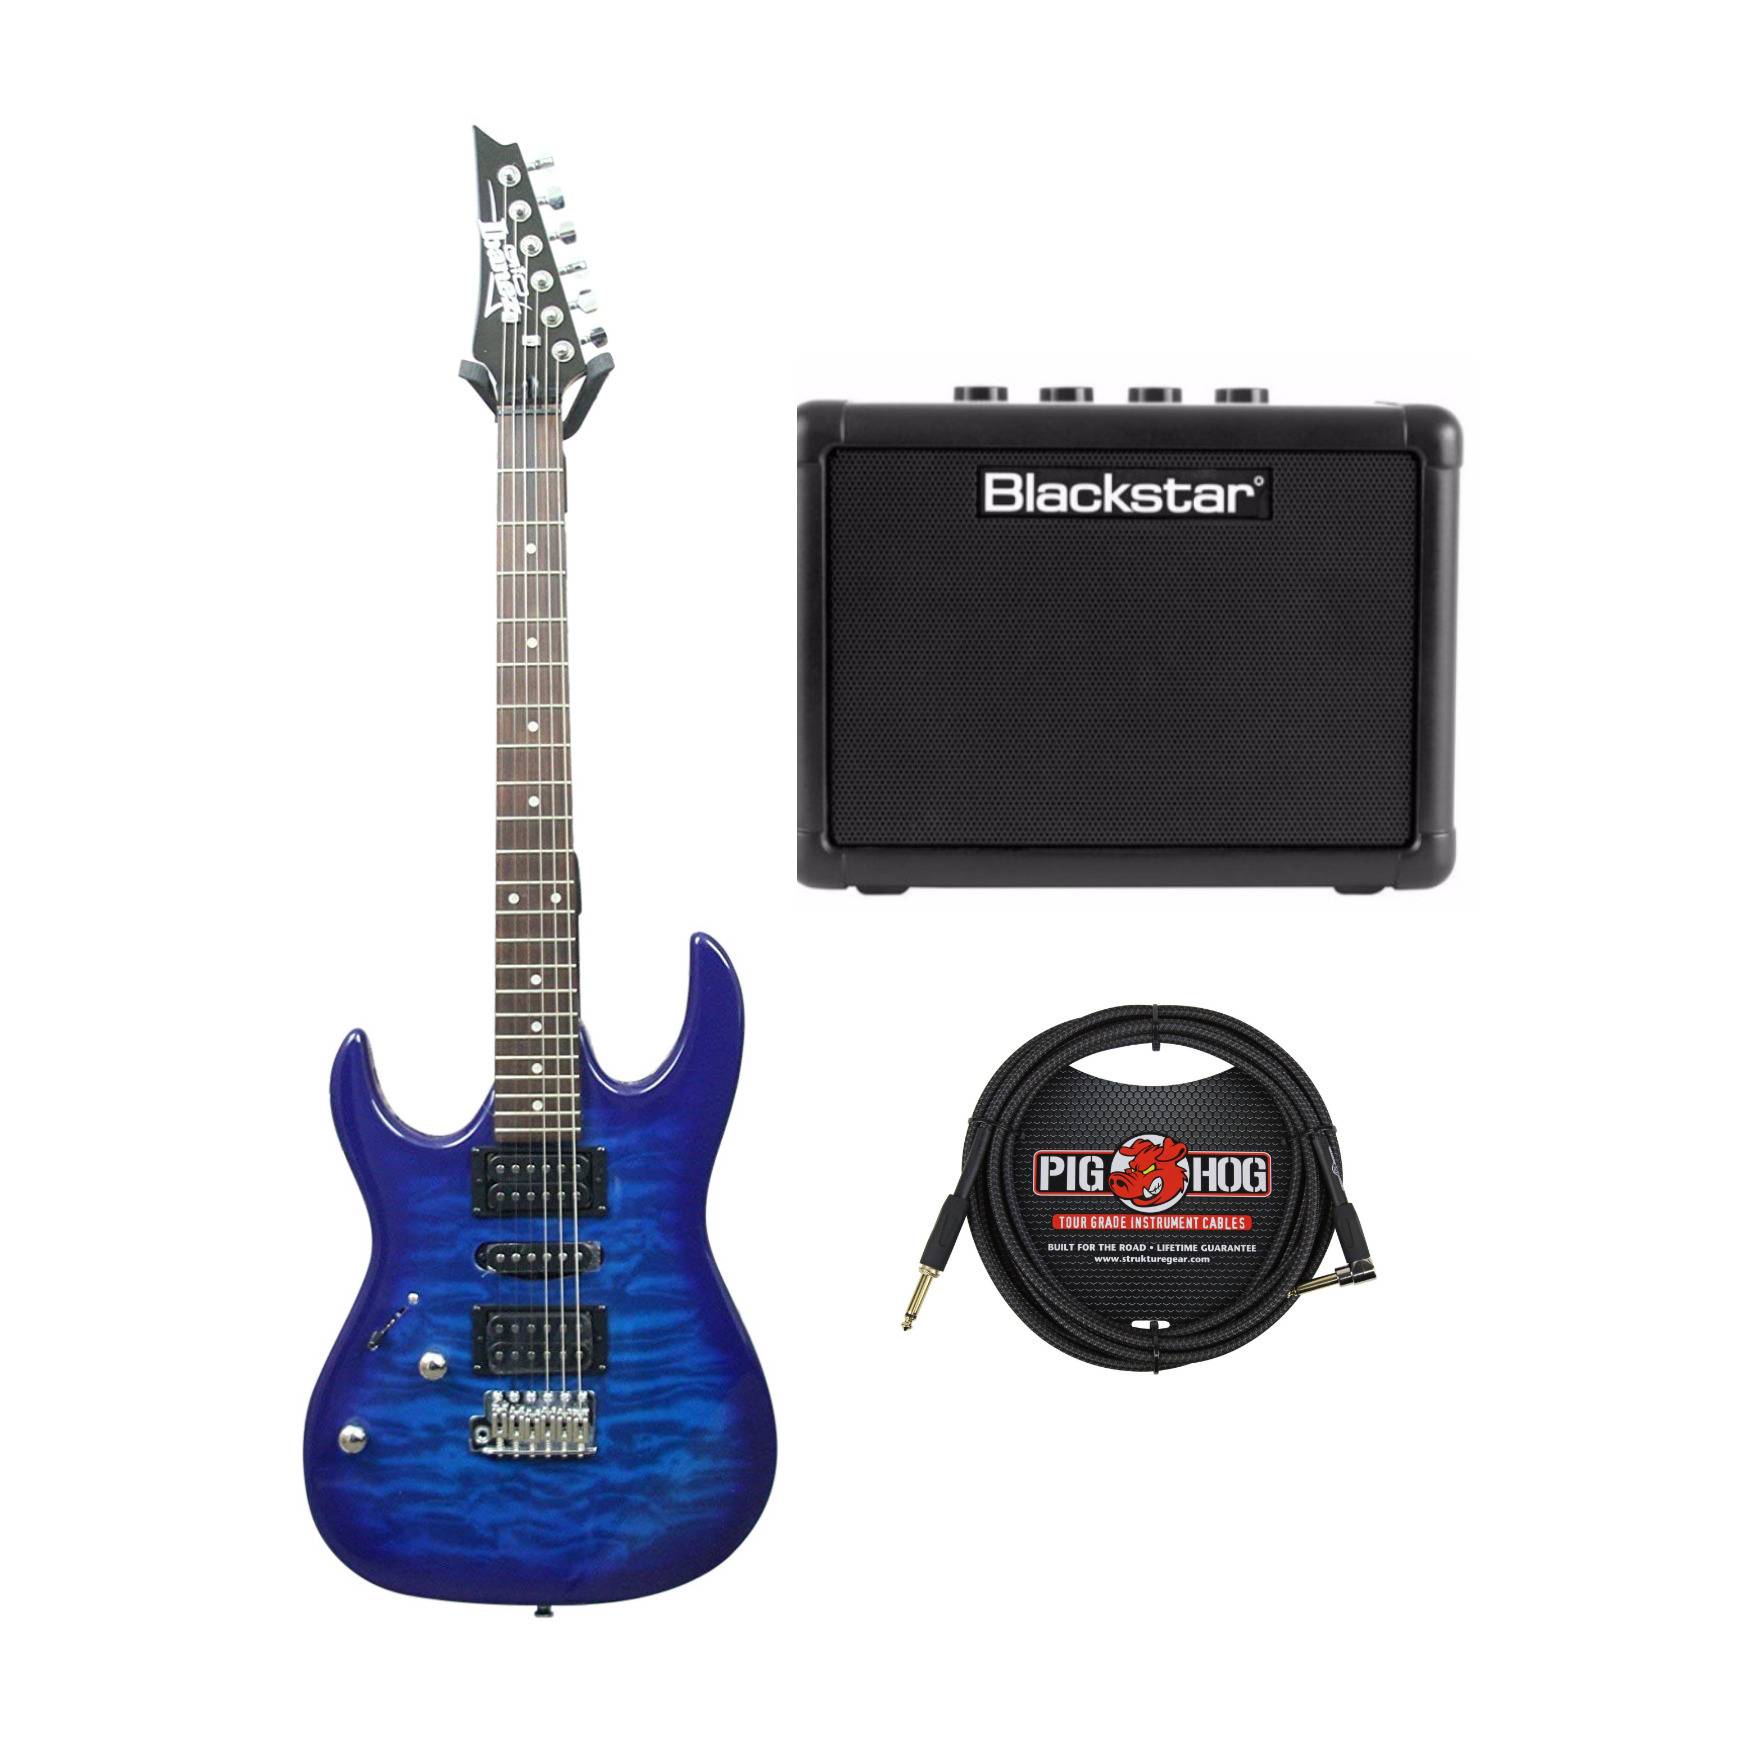 Ibanez GRX70QAL GIO Left-Handed Electric Guitar (Transparent Blue Burst) Bundle with Amp and Cable